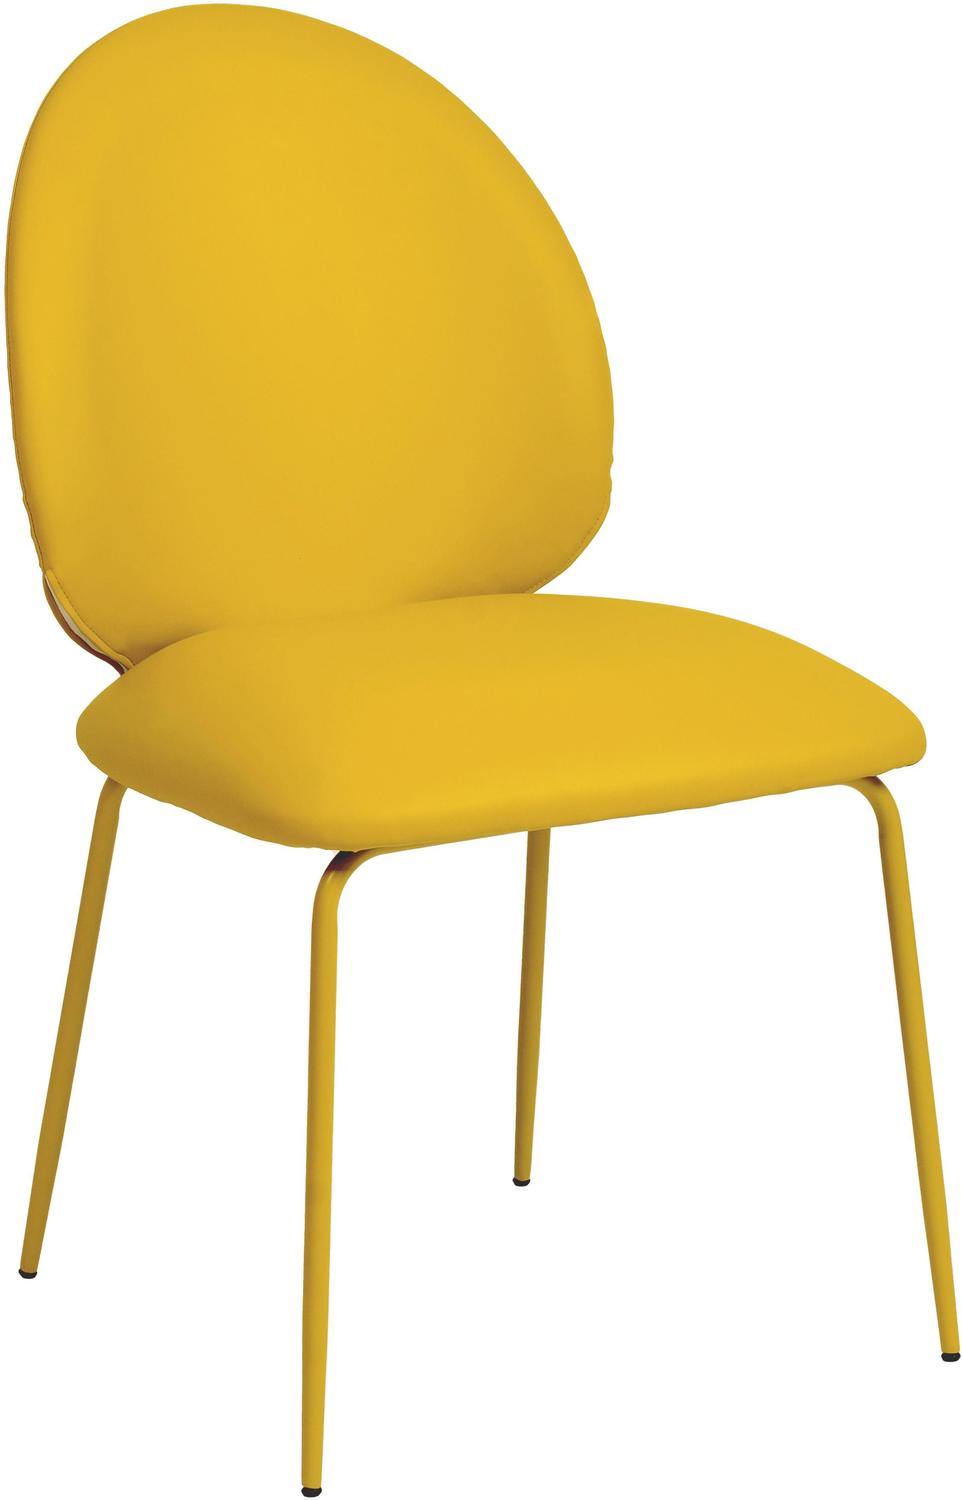 blue and white accent chair Contemporary Design Furniture Dining Chairs Yellow